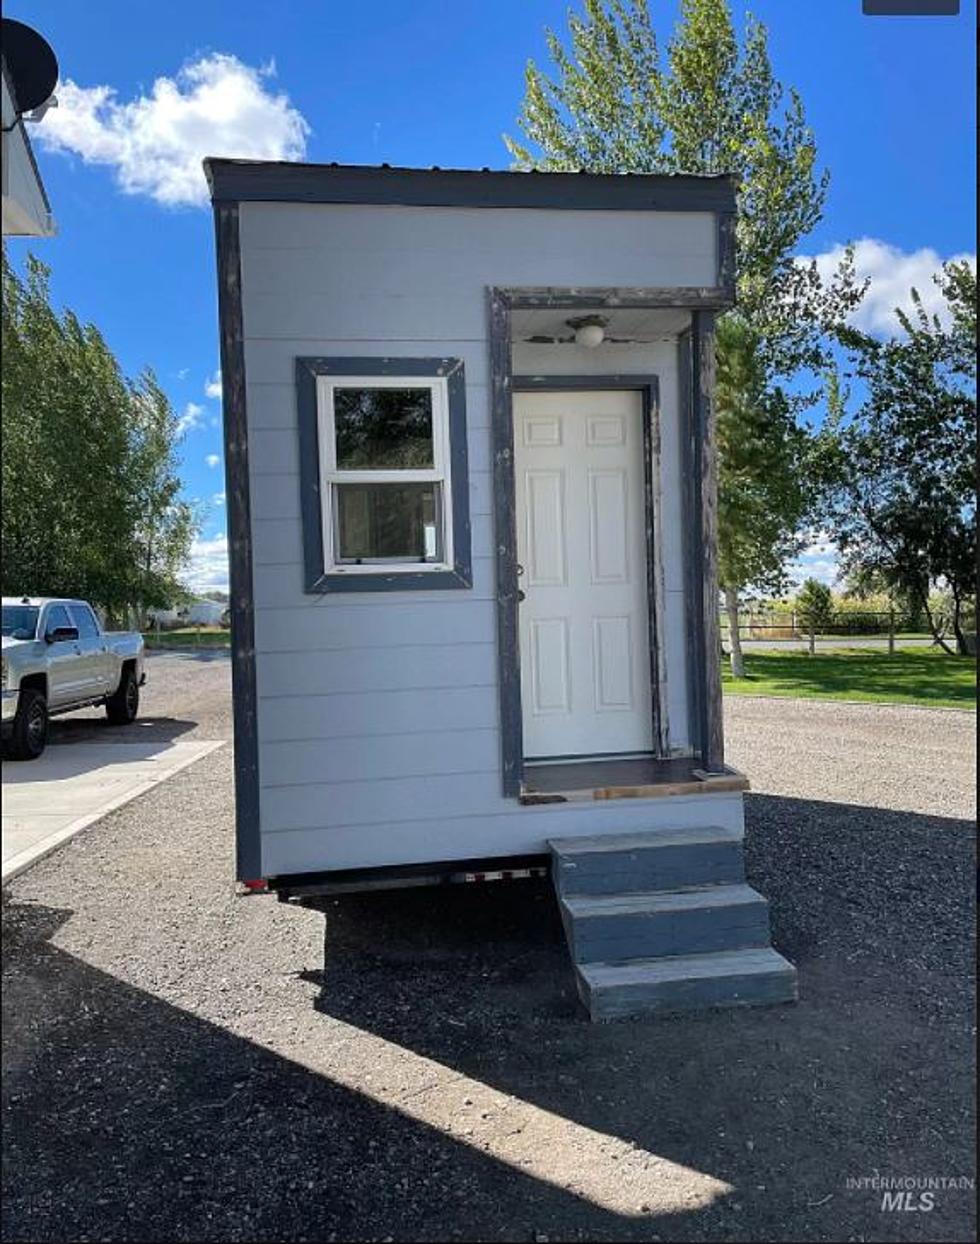 Tiny Home On Wheels For Sale In Twin Falls, ID For Less Than $20K